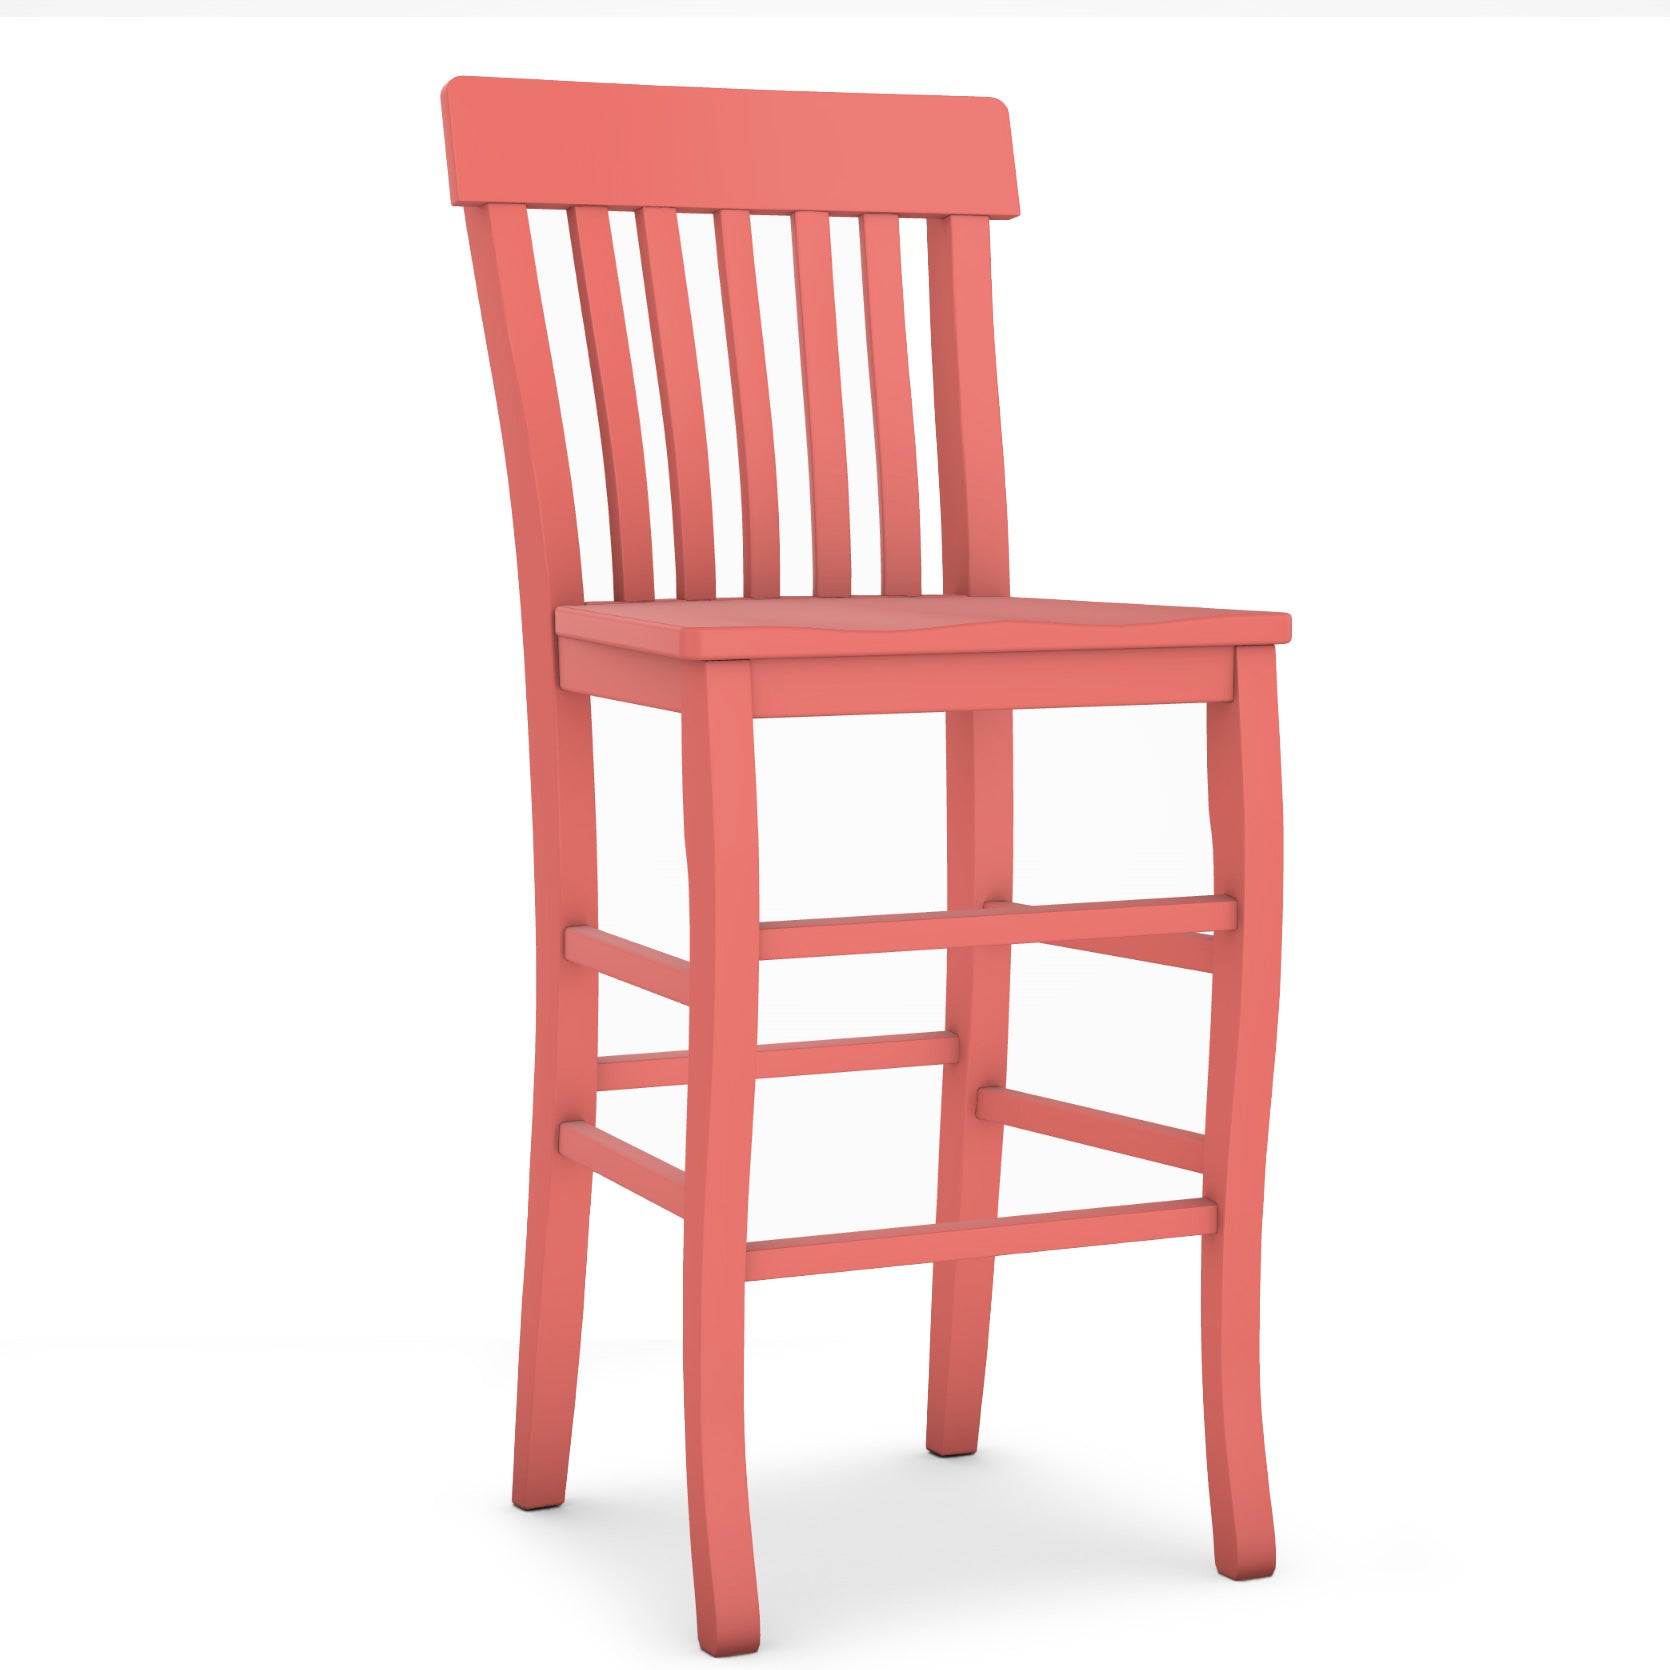 Maine Cottage Maine Cottage Cokie Bar Stool | Painted Wooden Bar Stool 